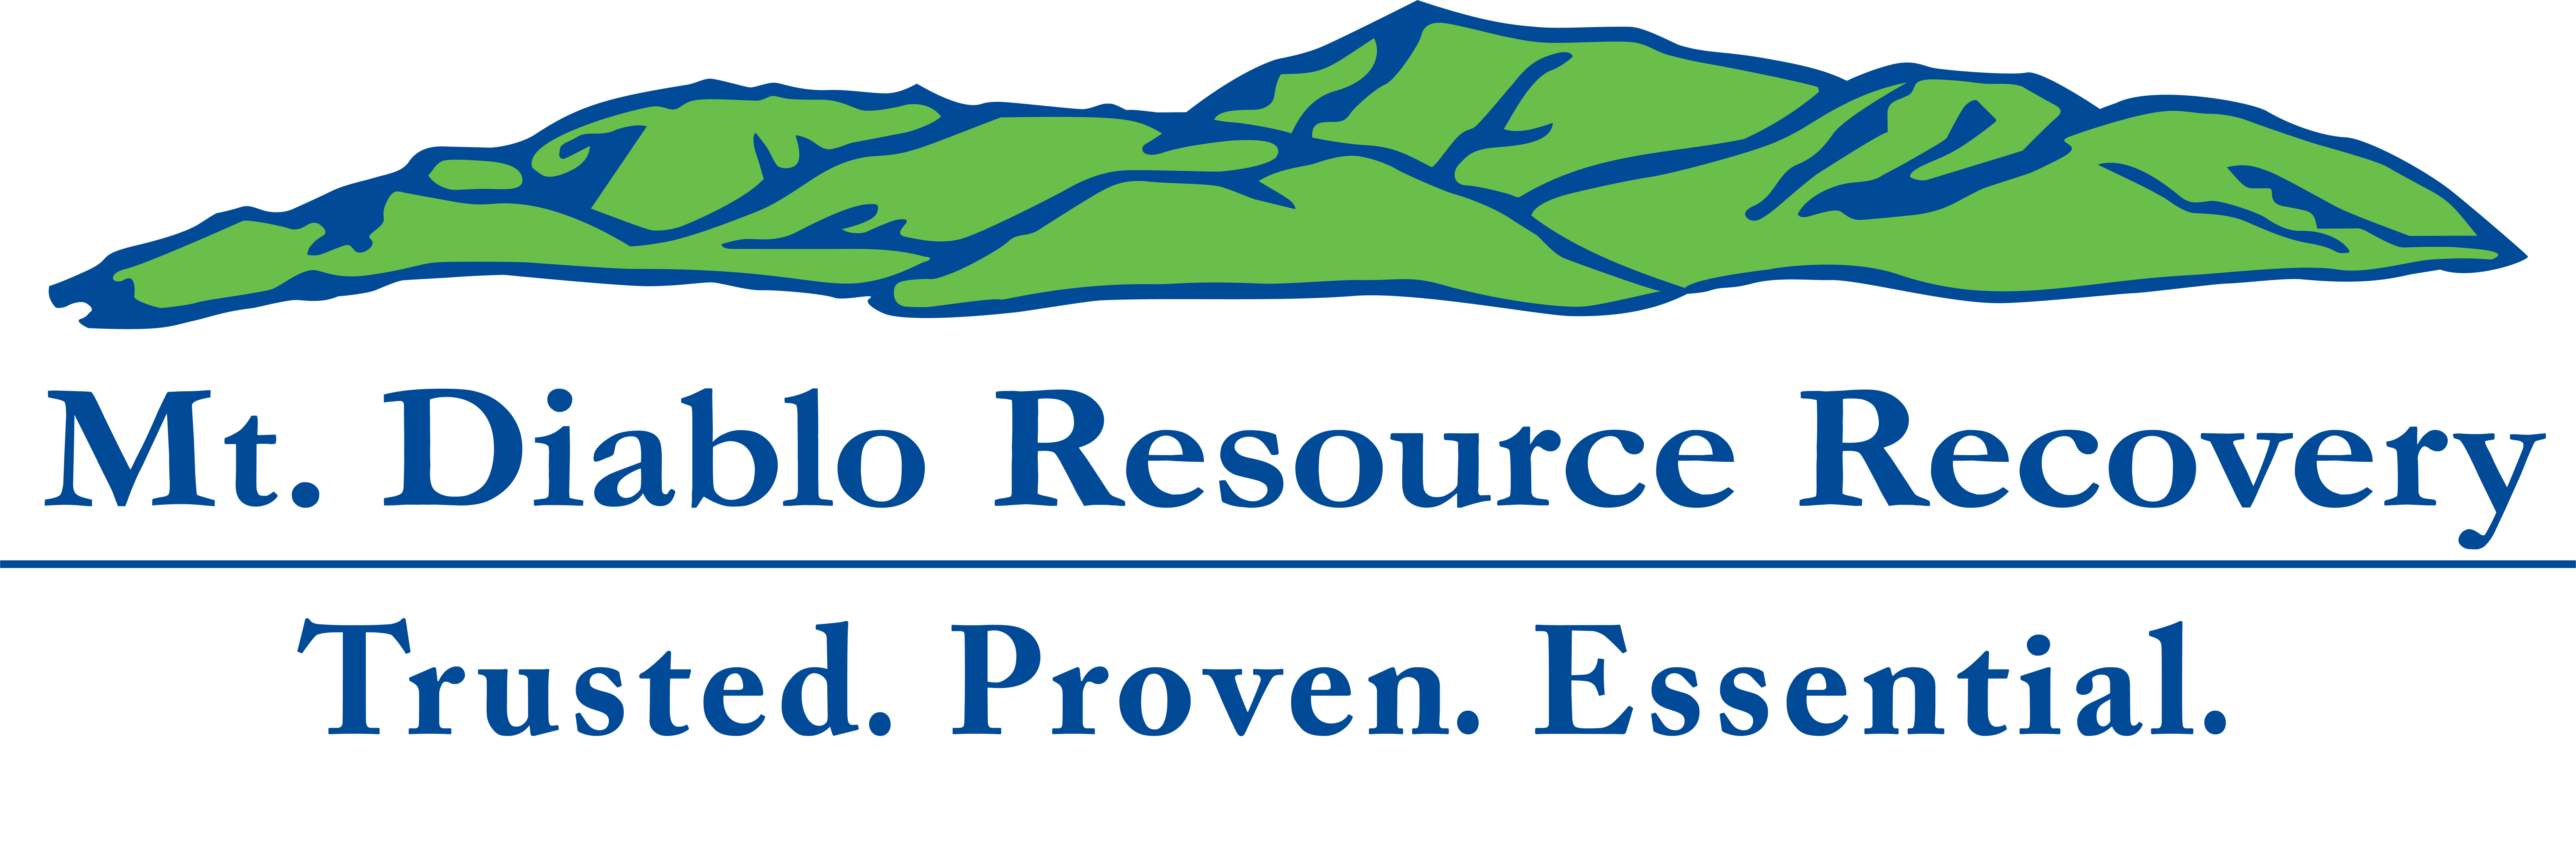 Mt. Diablo Resource and Recovery